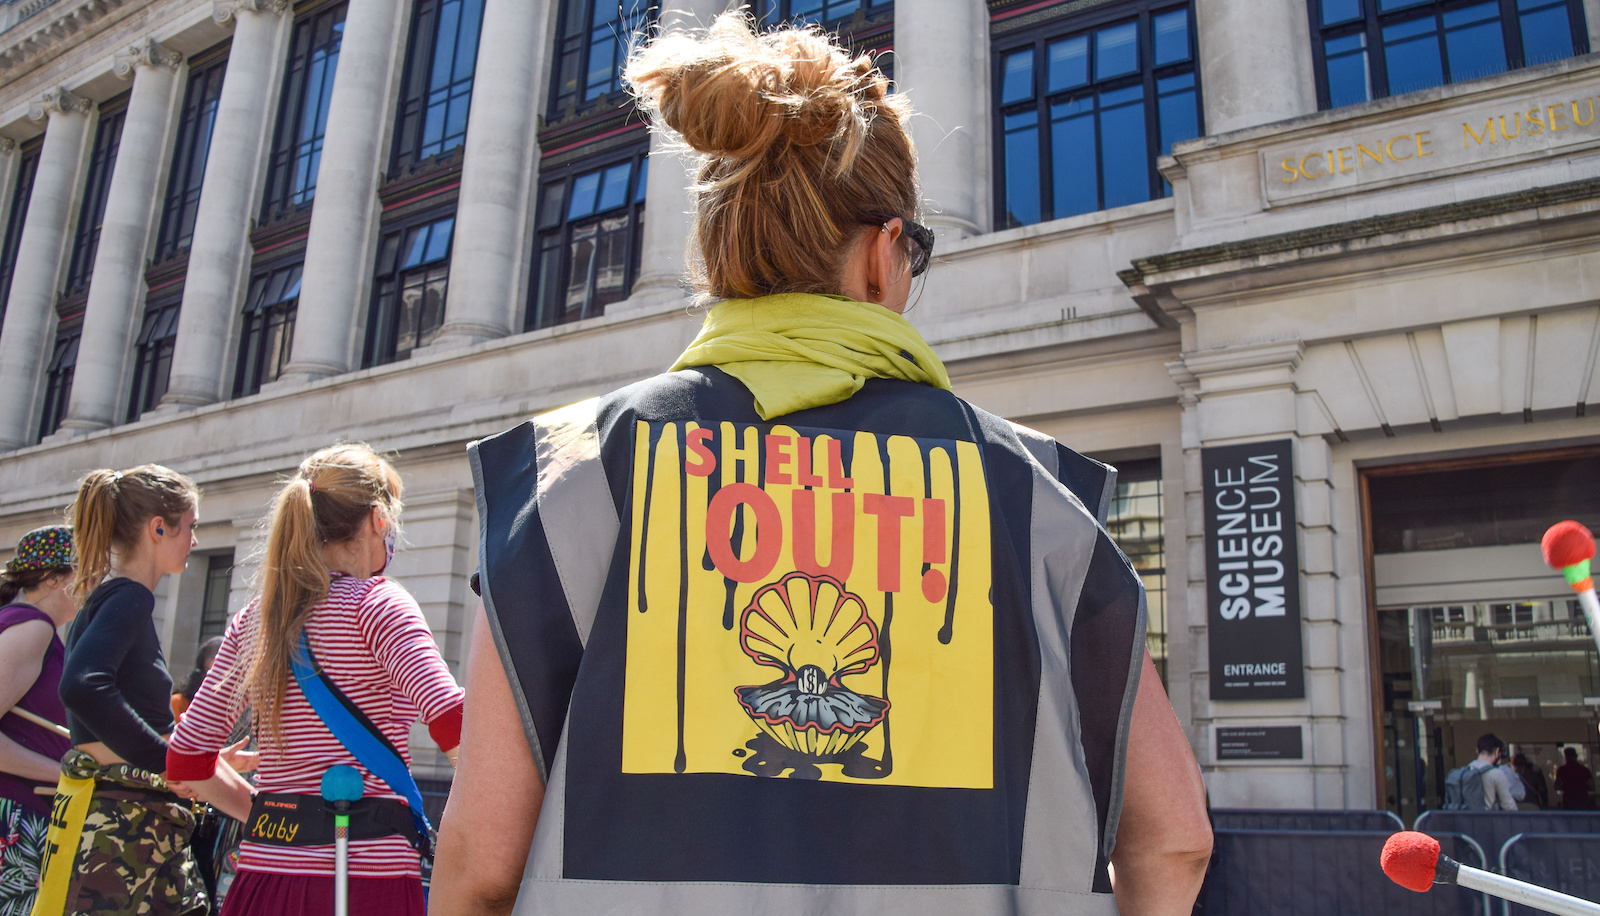 Woman stands outside UK science museum with shirt that says SHELL OUT